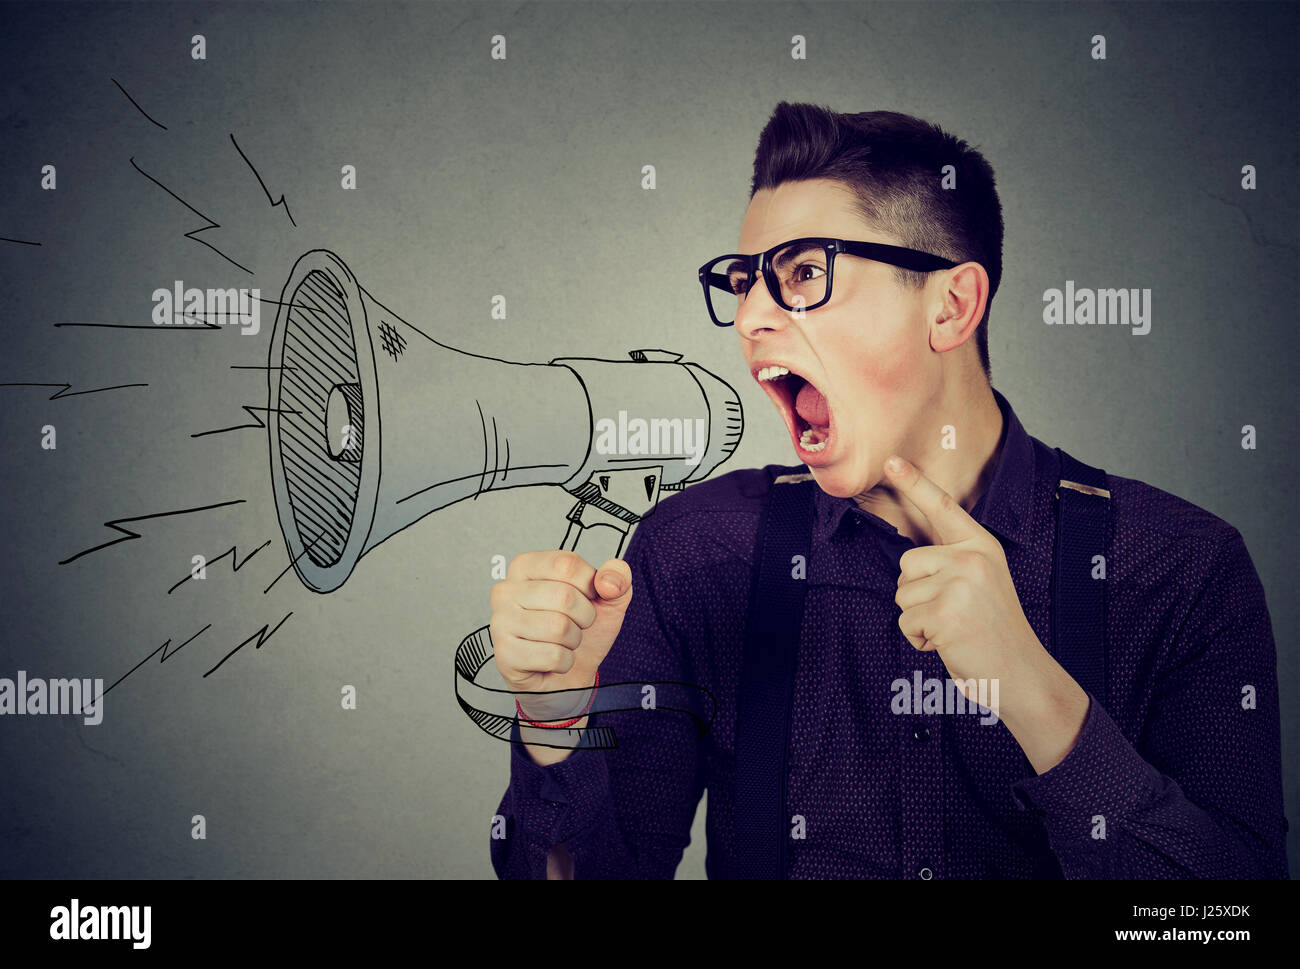 Angry young man screaming in megaphone isolated on gray background. Negative face expression emotion feeling. Propaganda, breaking news, power of soci Stock Photo